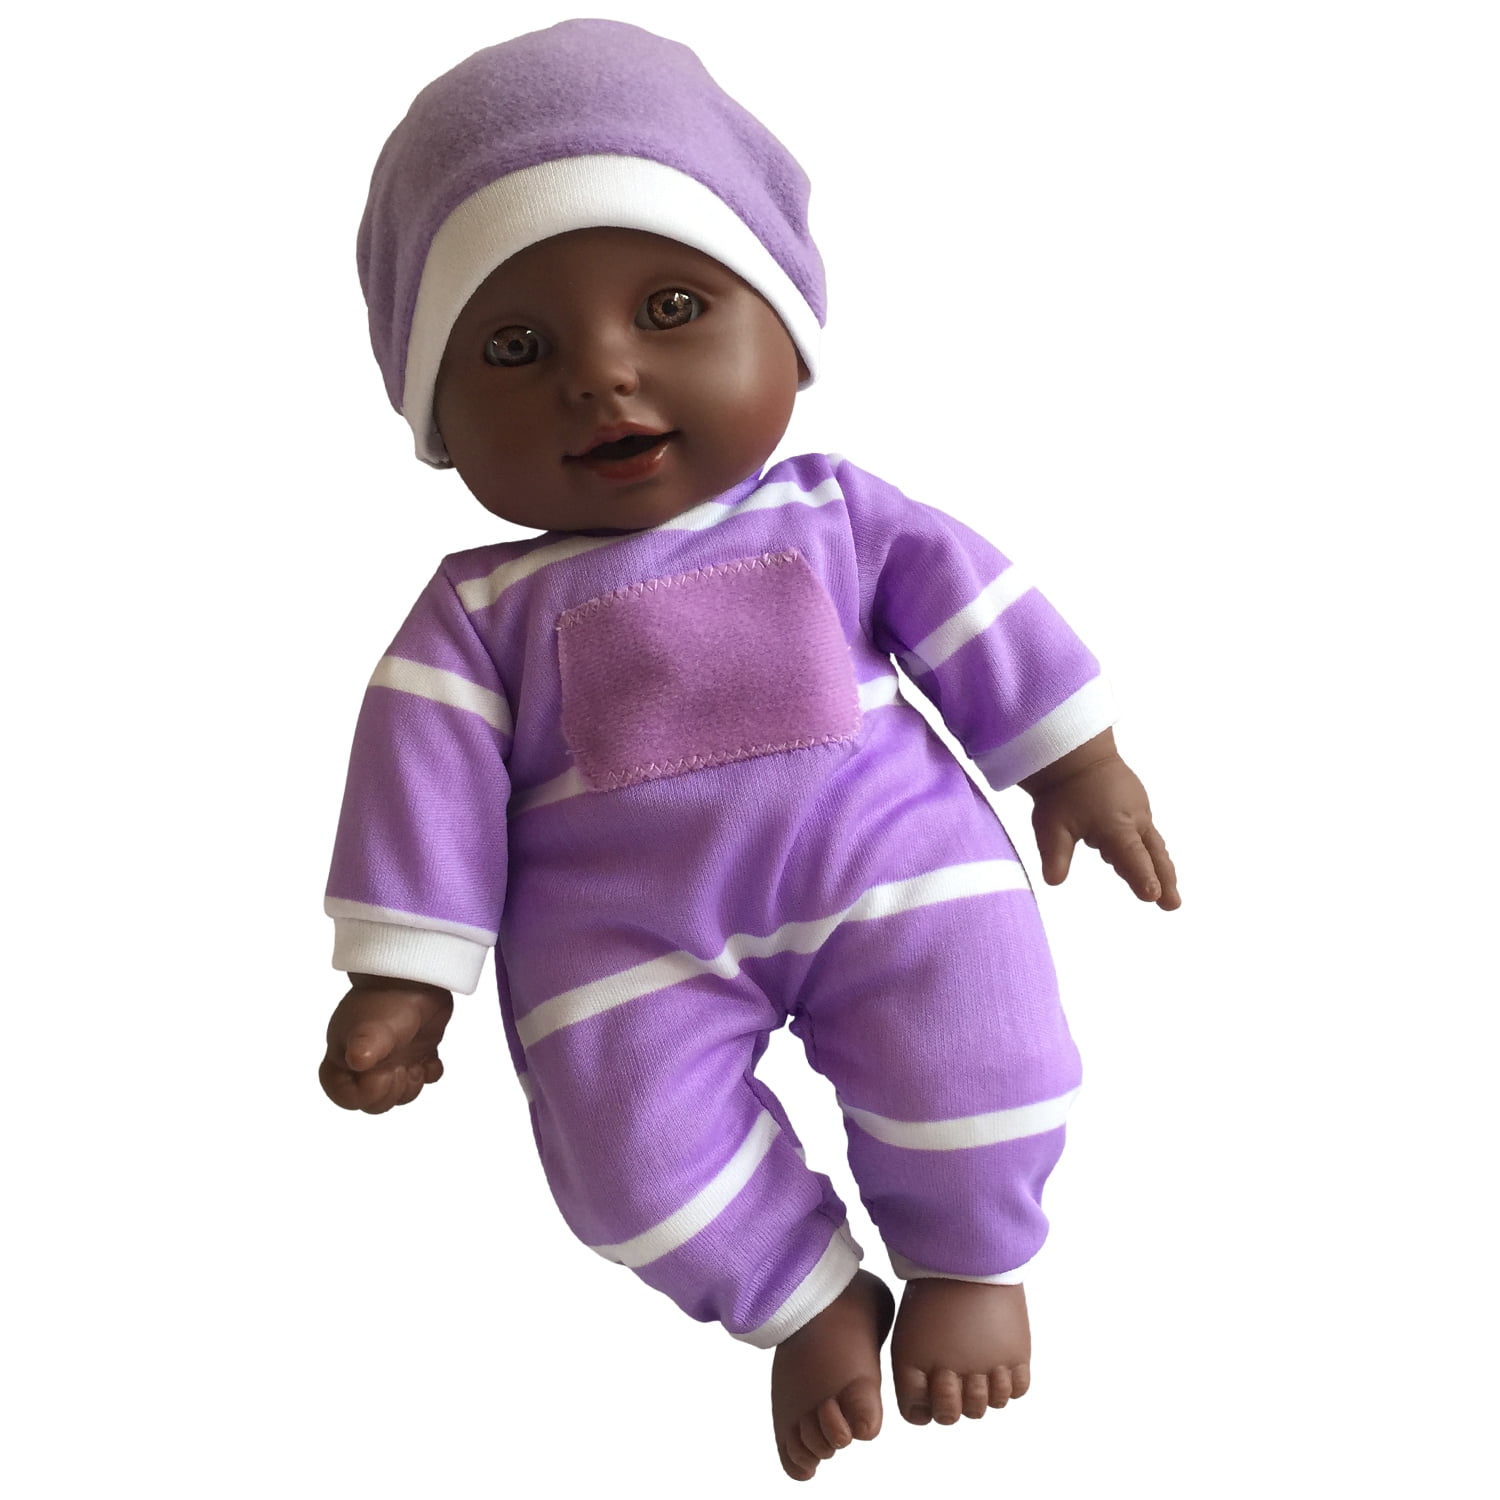 The New York Doll Collection 11 inch/28 cm Soft Body Boy Baby Doll in Gift Box 